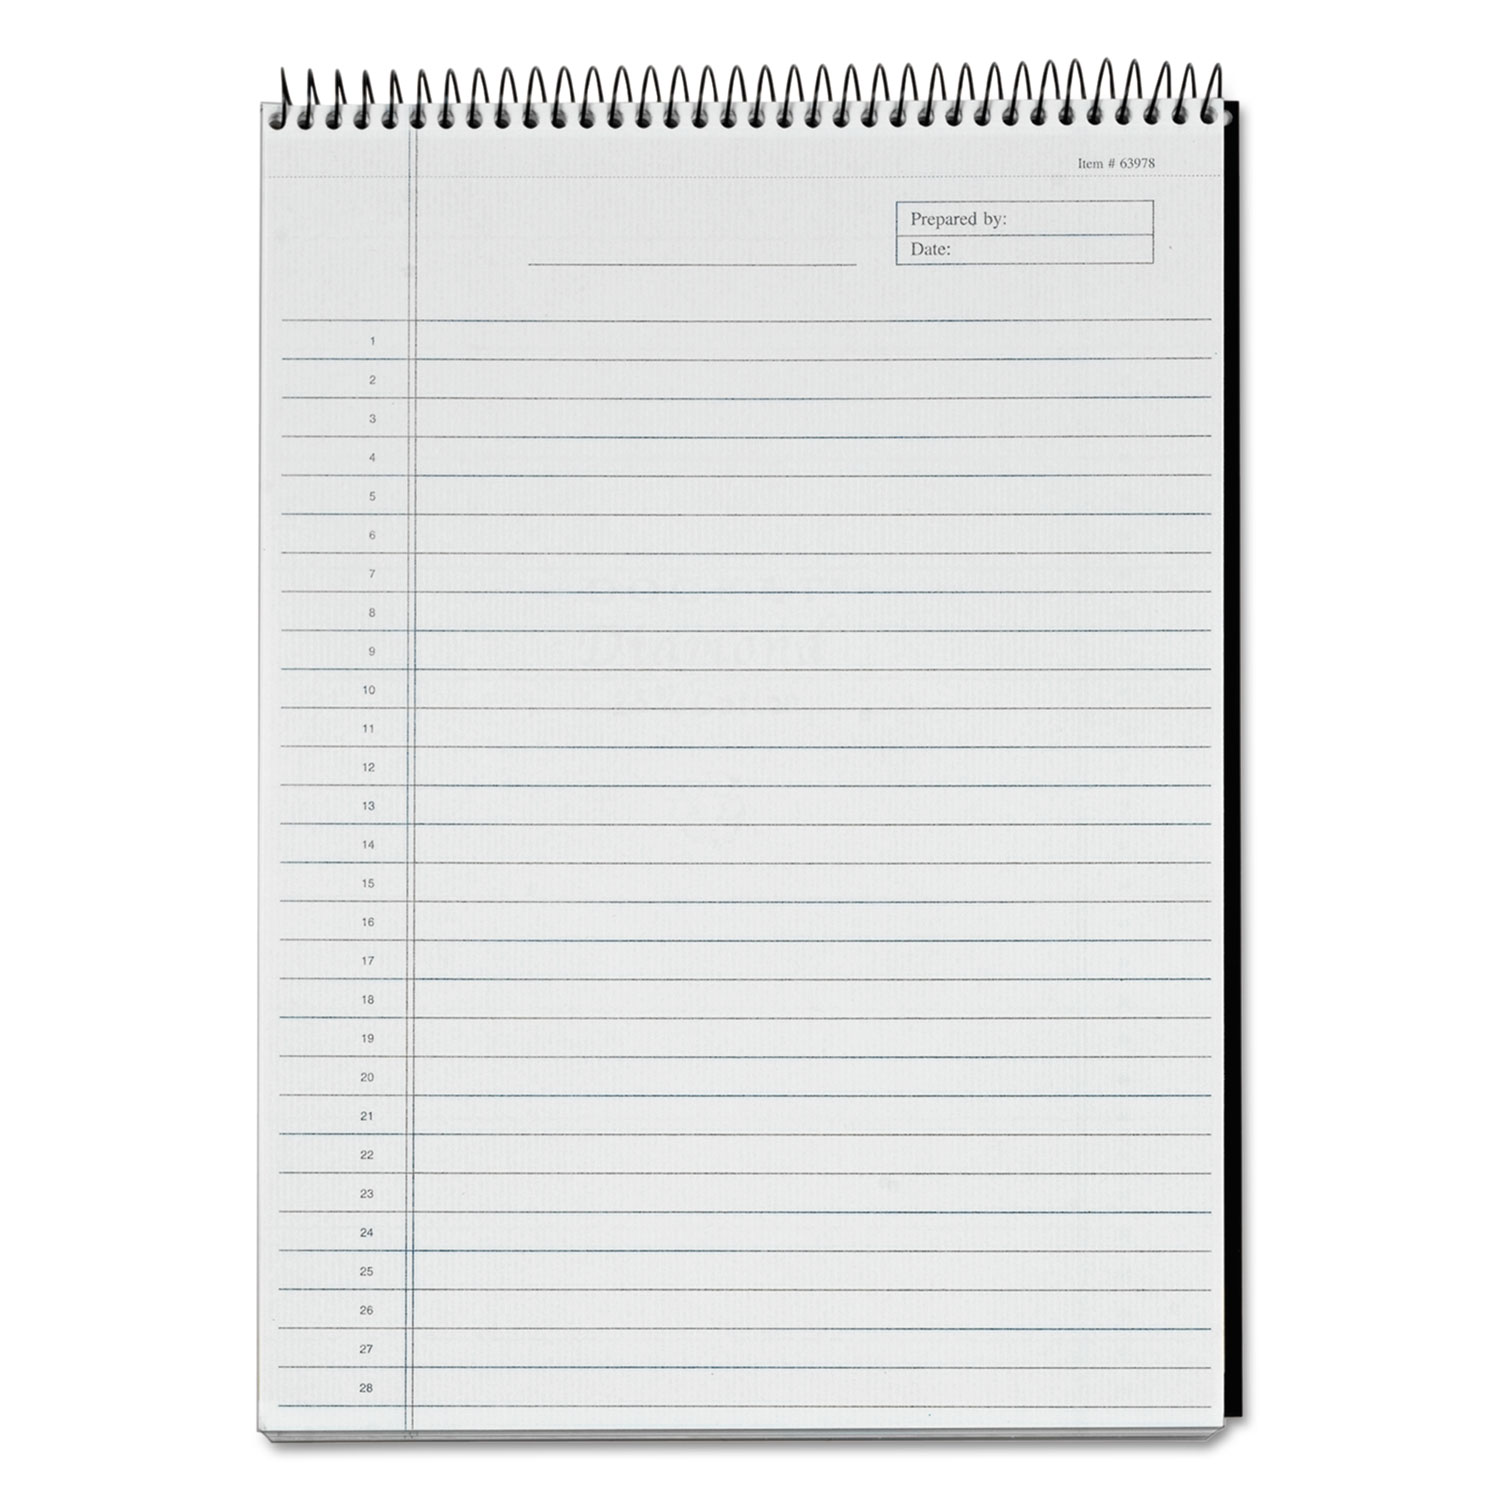  TOPS 63978 Docket Diamond Top-Wire Planning Pad, Wide/Legal Rule, Black, 8.5 x 11.75, 60 Sheets (TOP63978) 